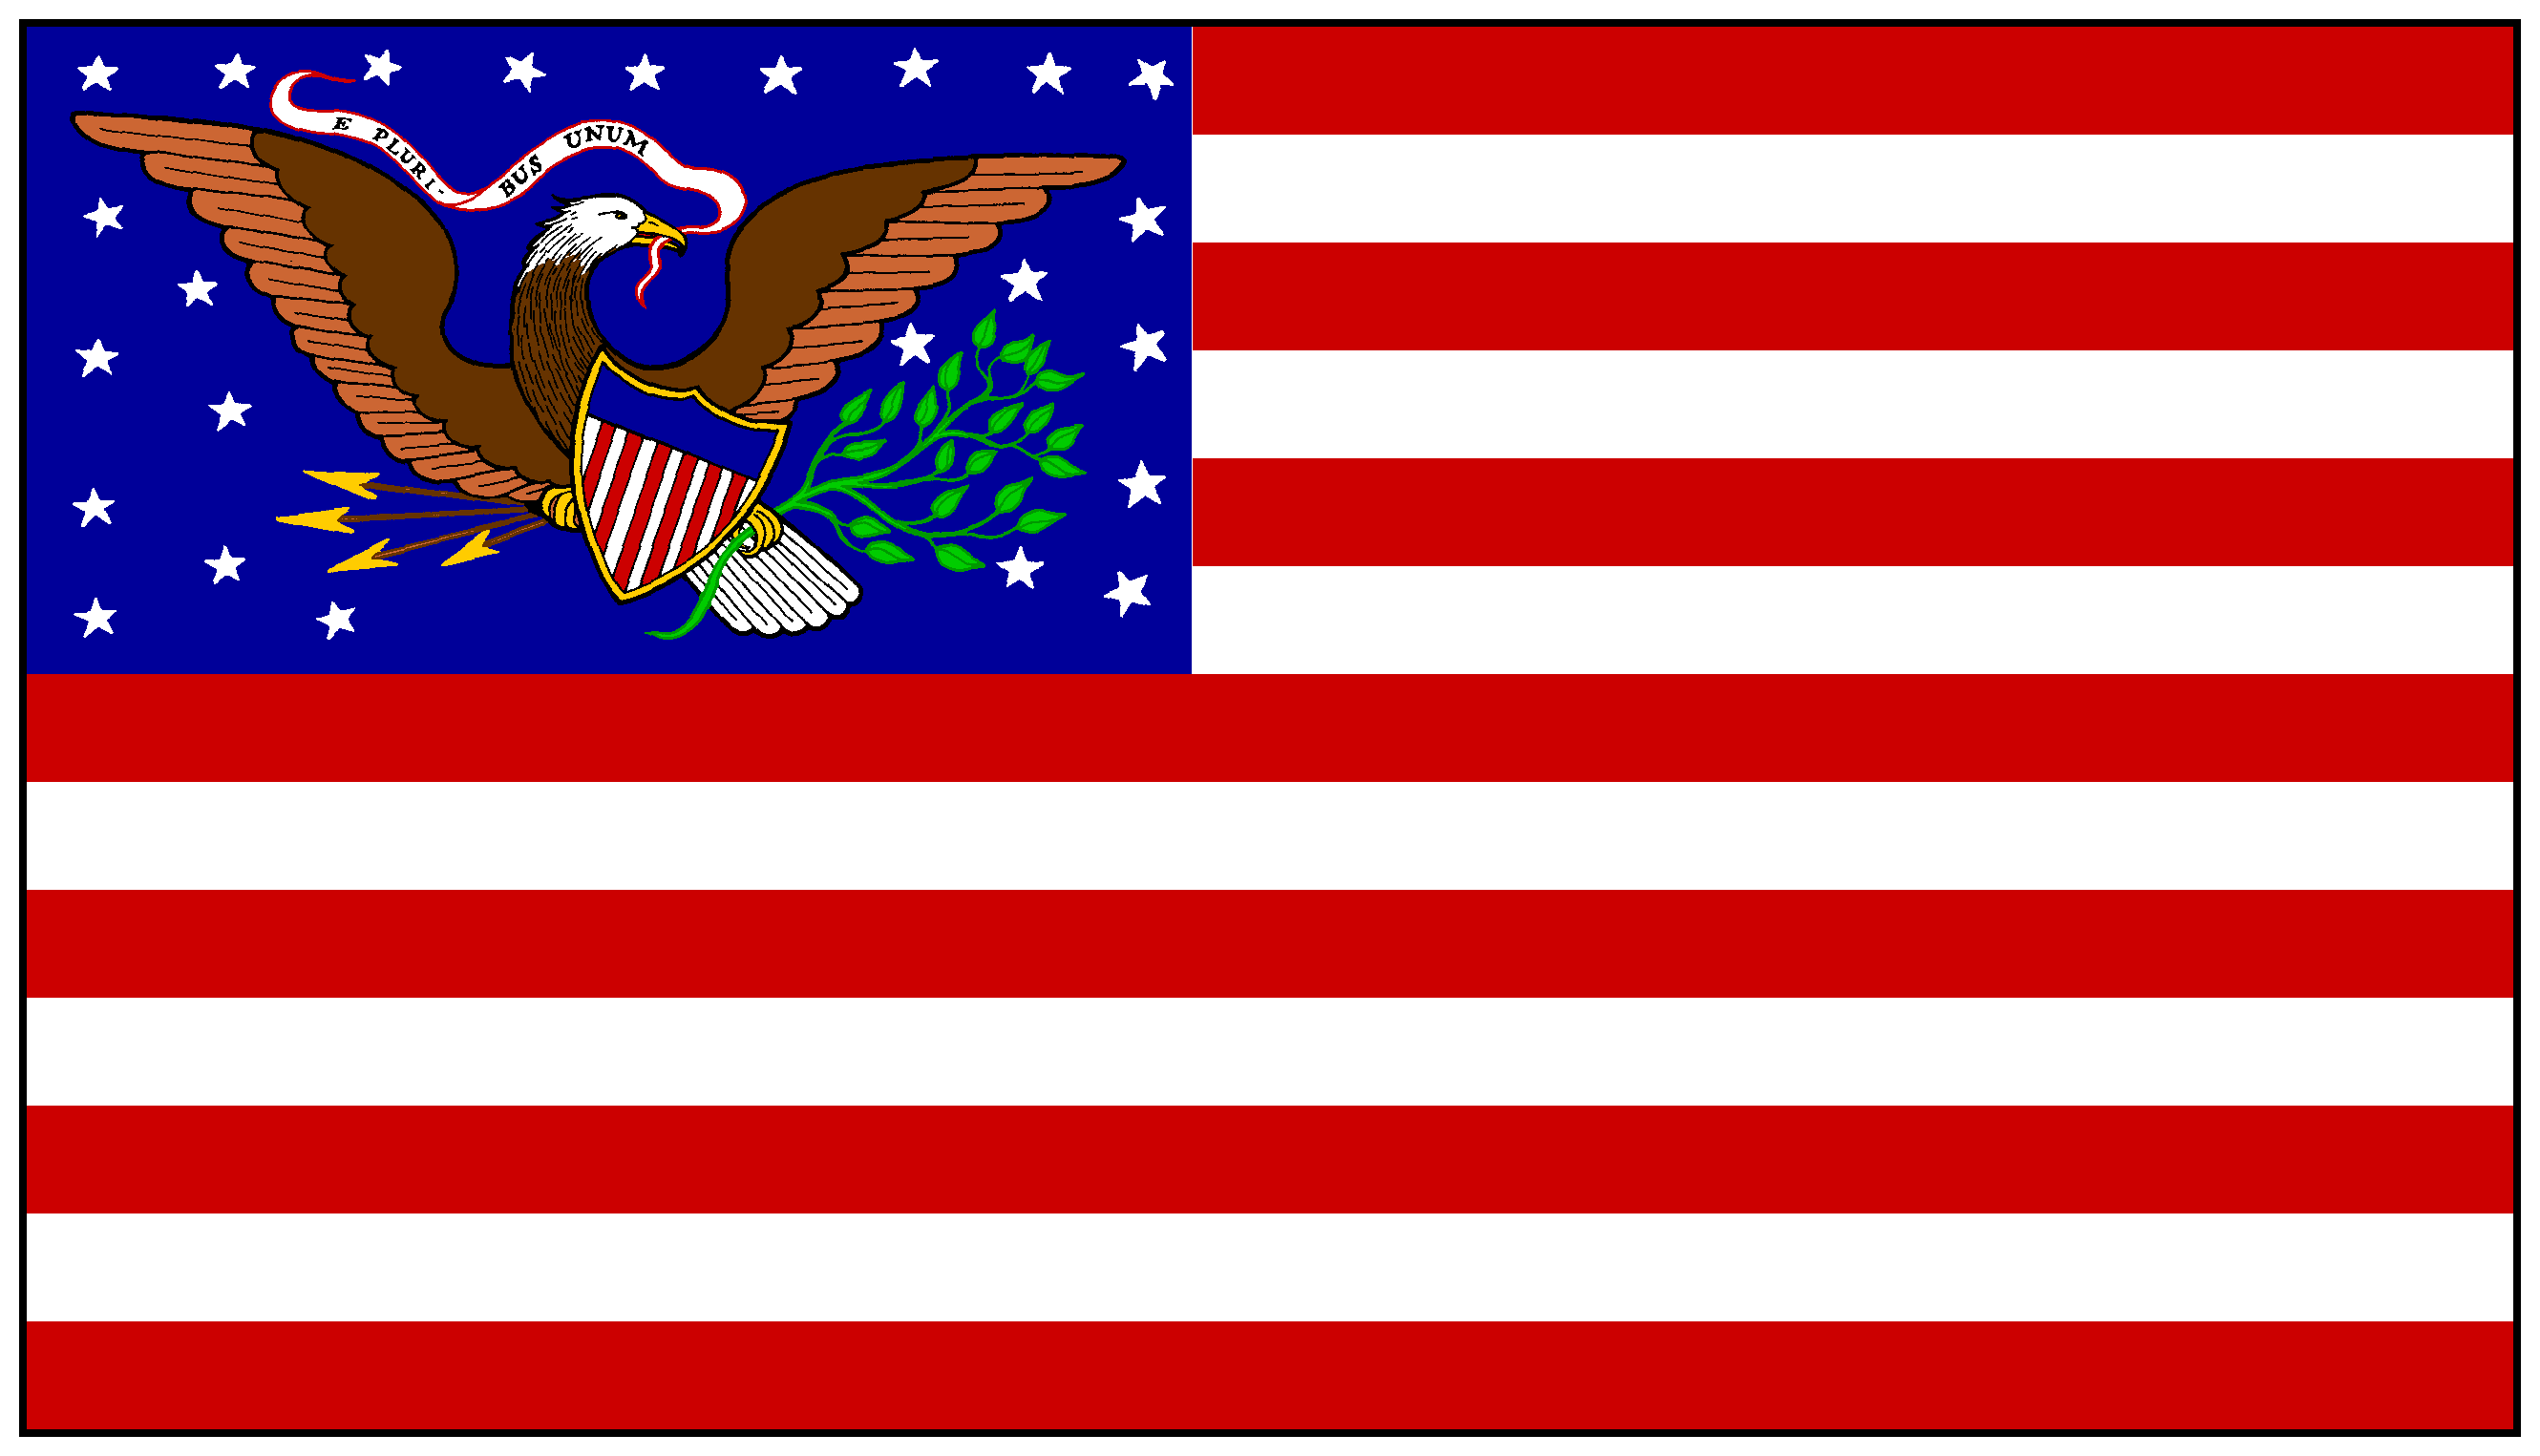 Official United States Flags Wallpaper Desktop